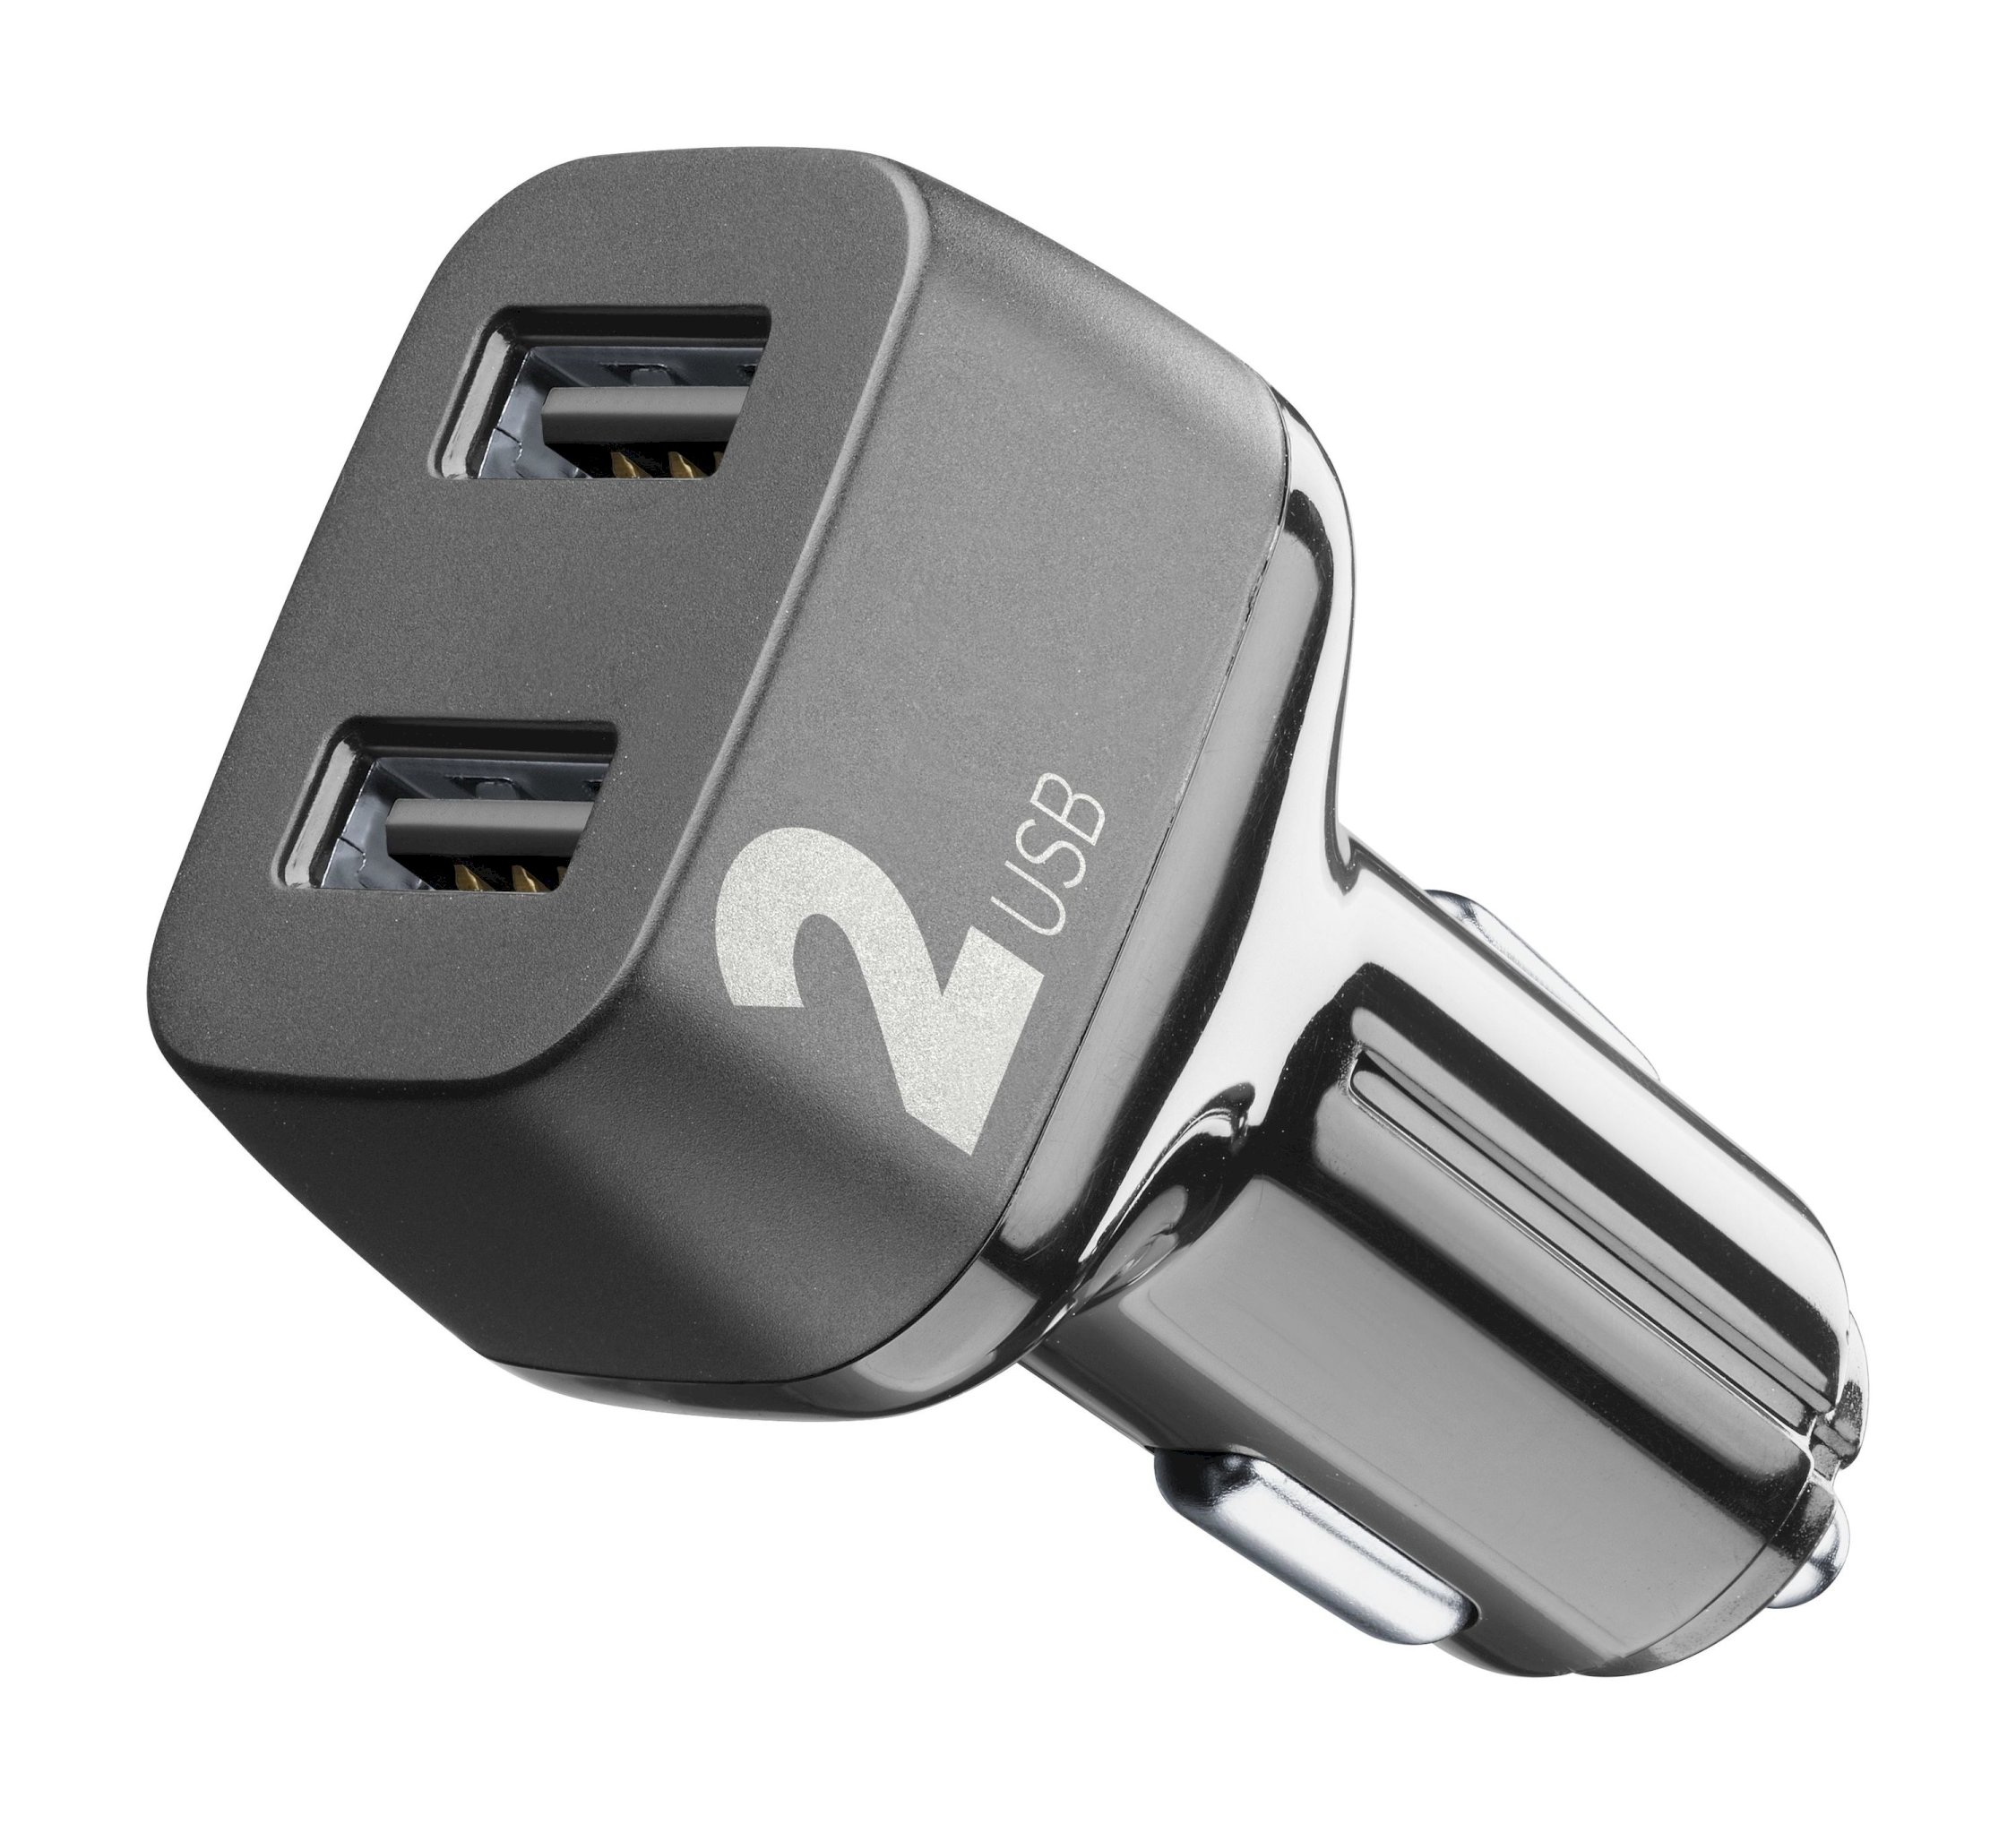 Car charger, multipower 2 usb 2 x 18W, black